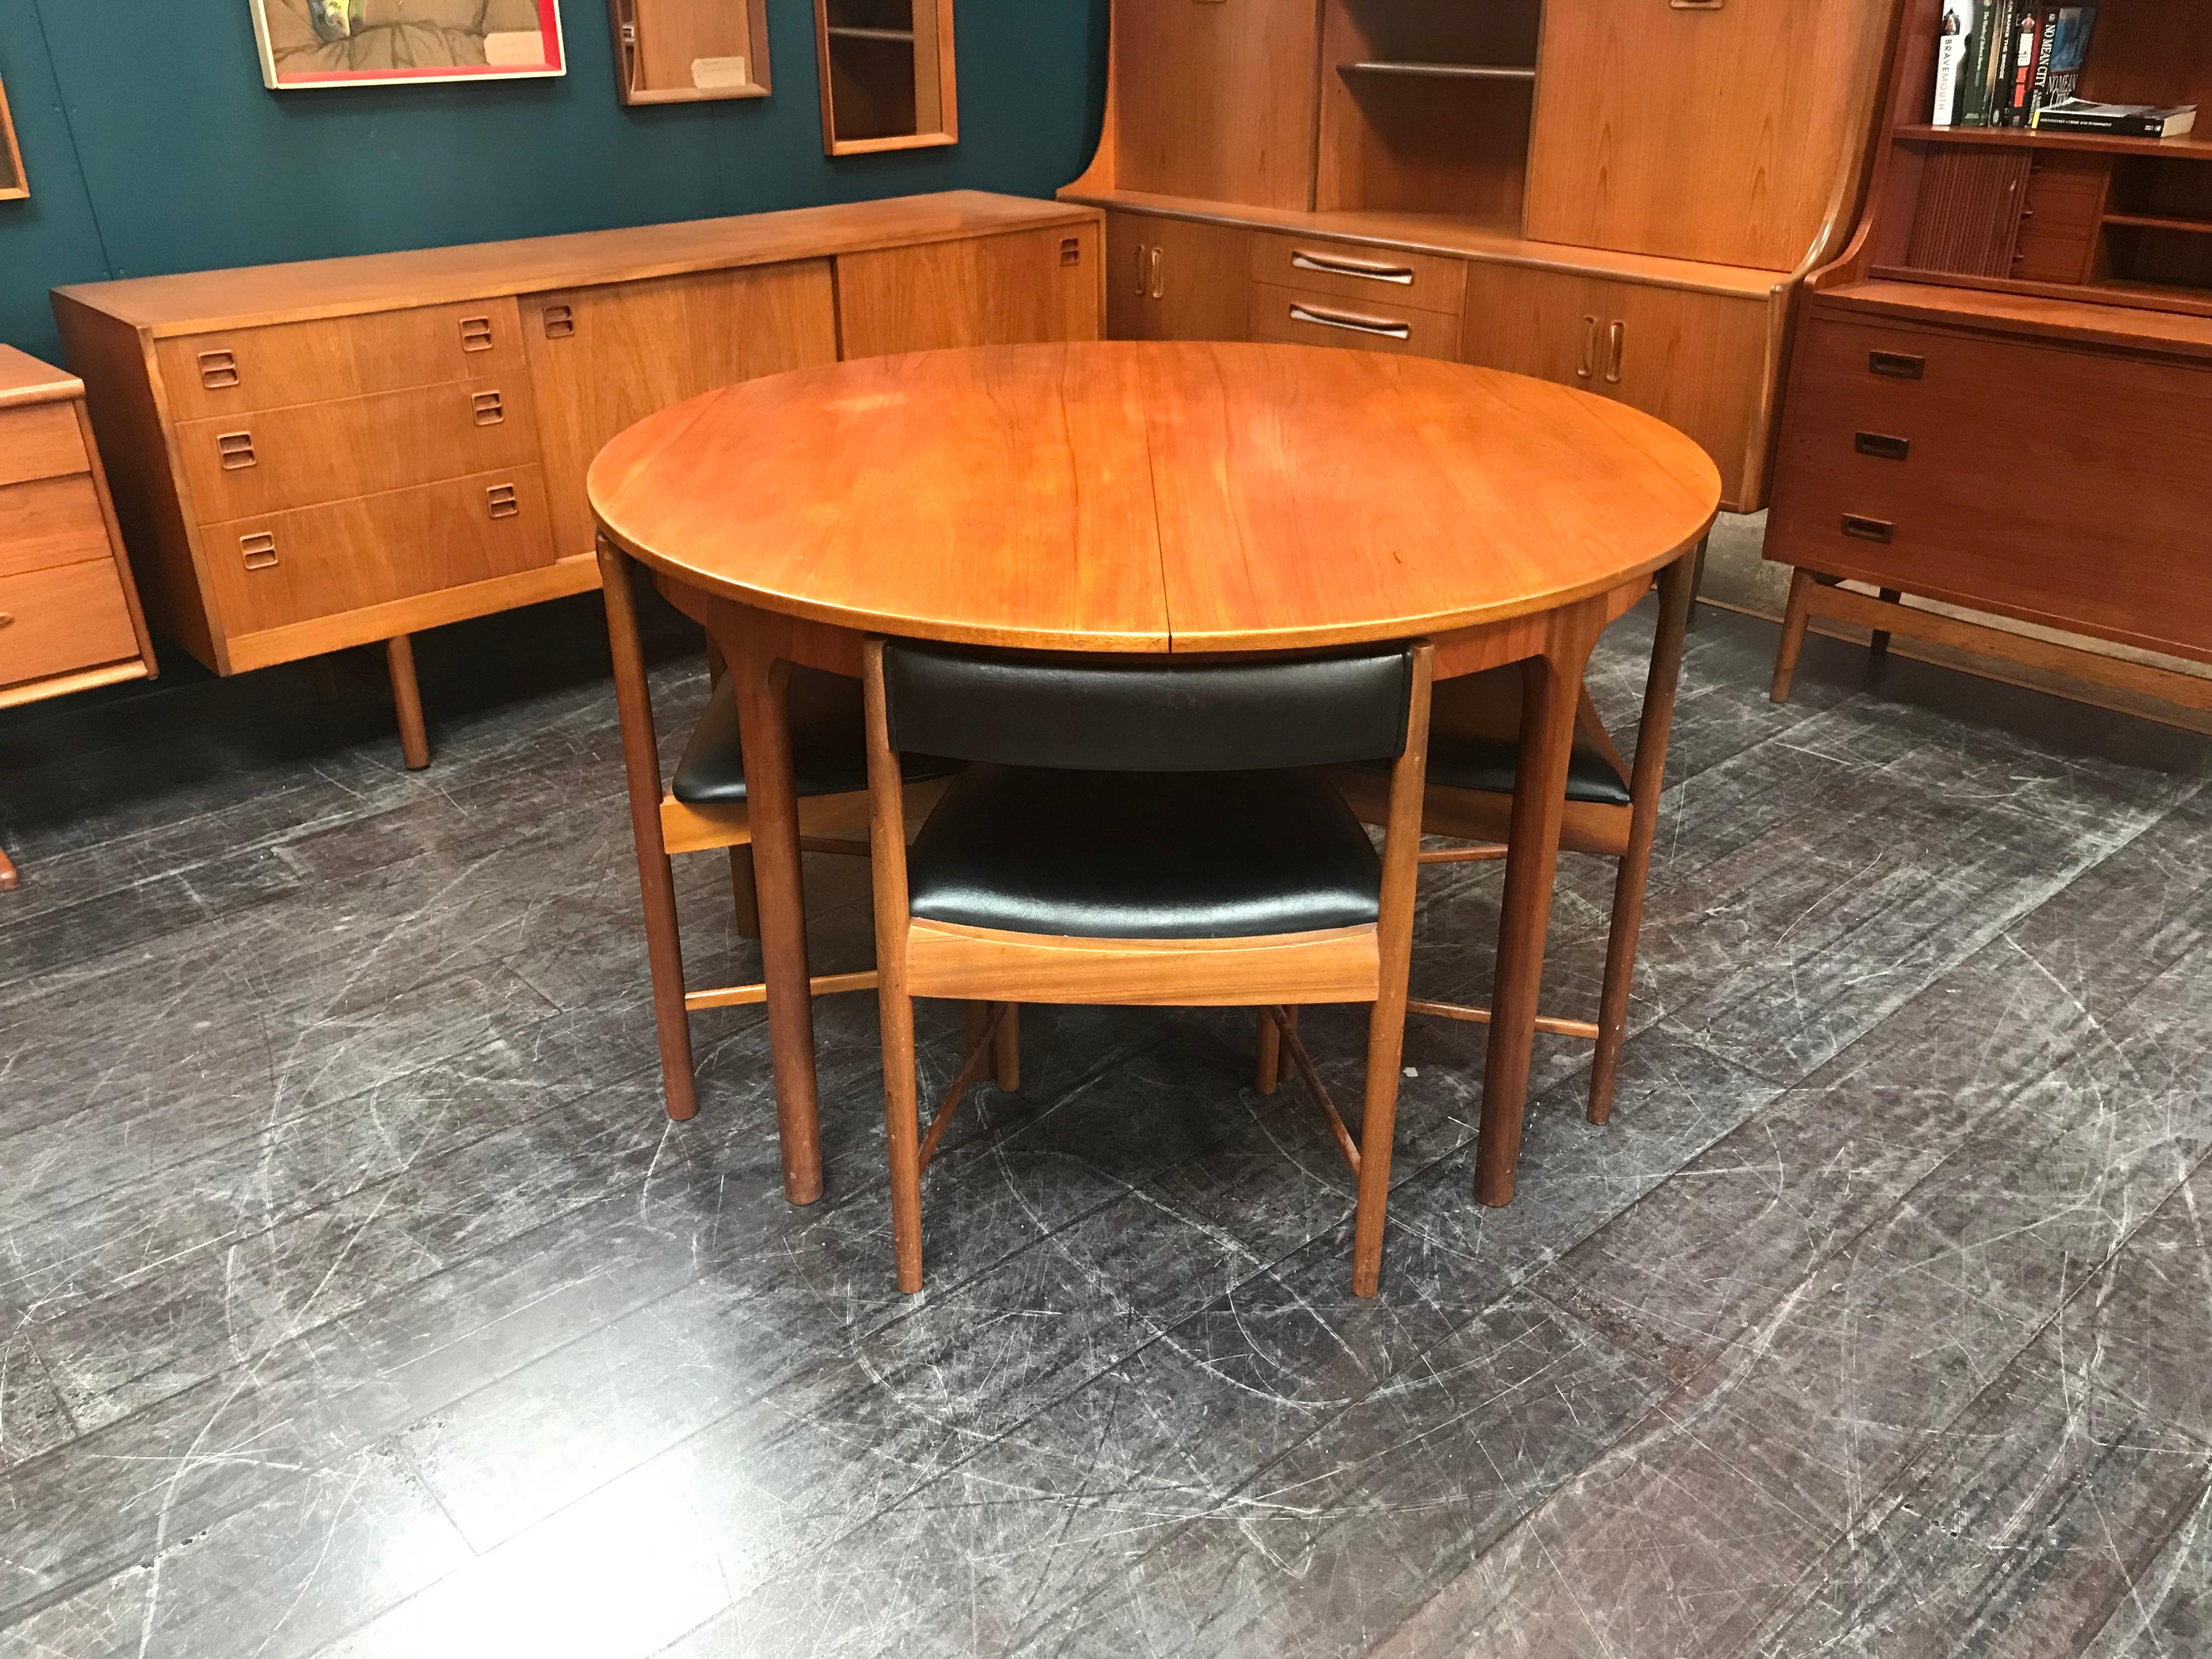 This classic mid-century dining table comes with 4 chairs and extends to accommodate 6 people, if required. The chairs and table are cleverly designed so that the chairs all neatly tuck under the edge of the table top. Space saving and… very cool to